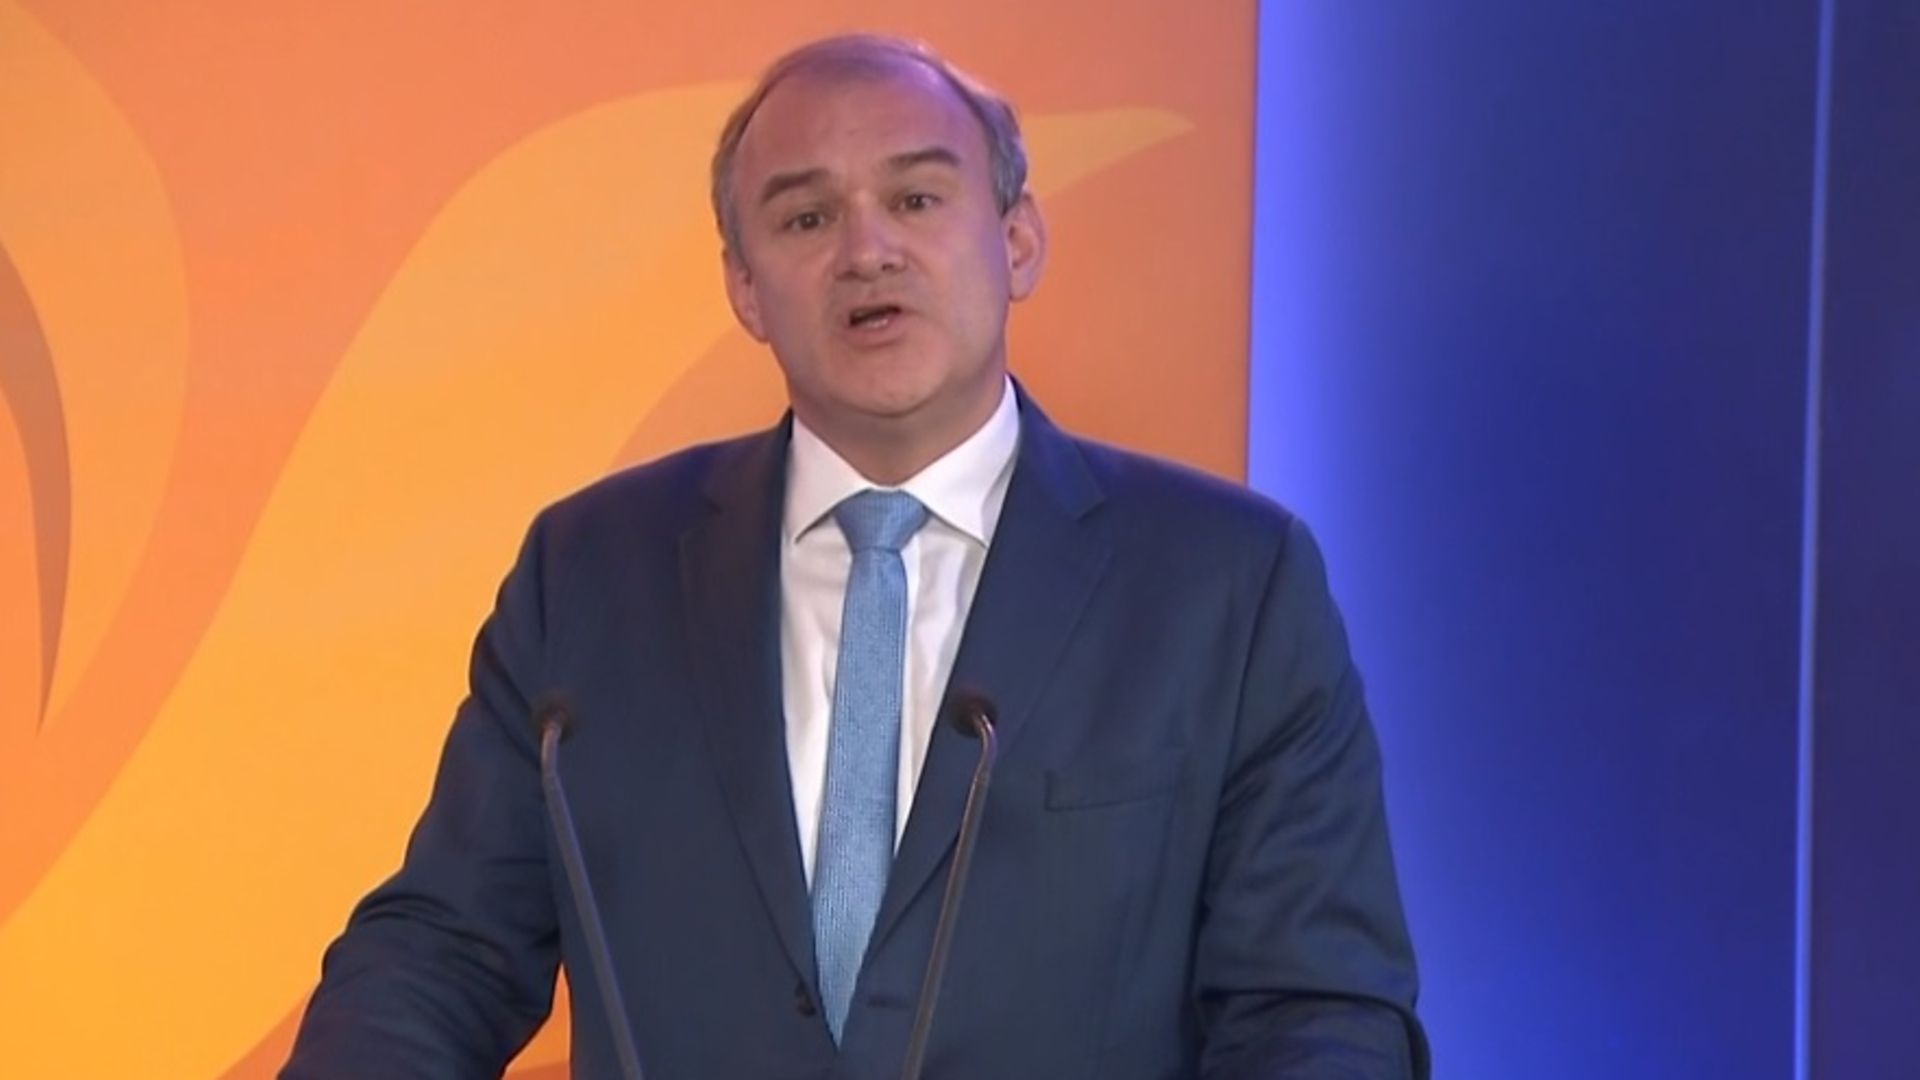 Ed Davey, the leader of the Liberal Democrats - Credit: BBC